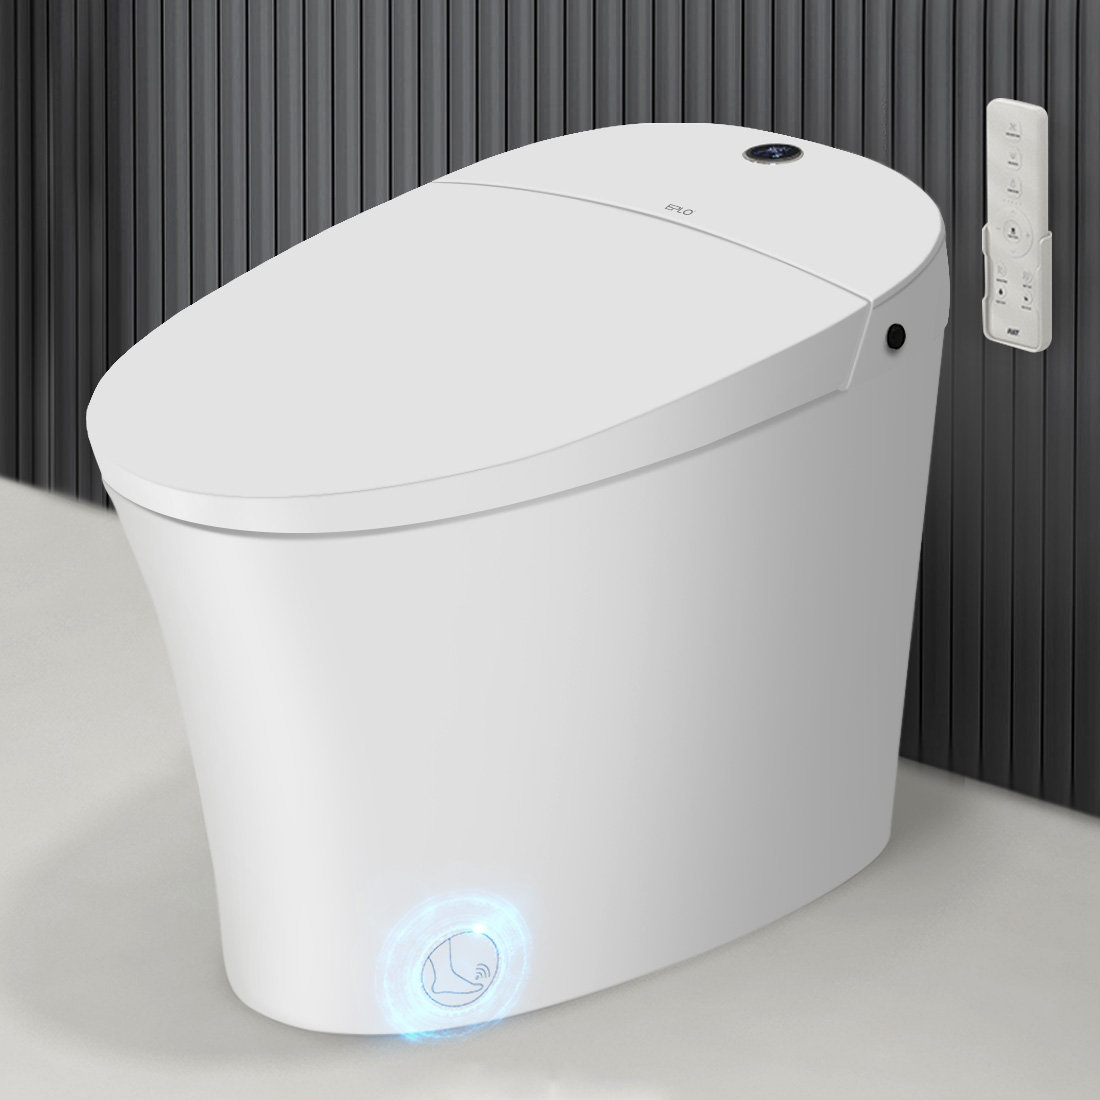 Reach Eco Wall Hung Toilet Bowl in White